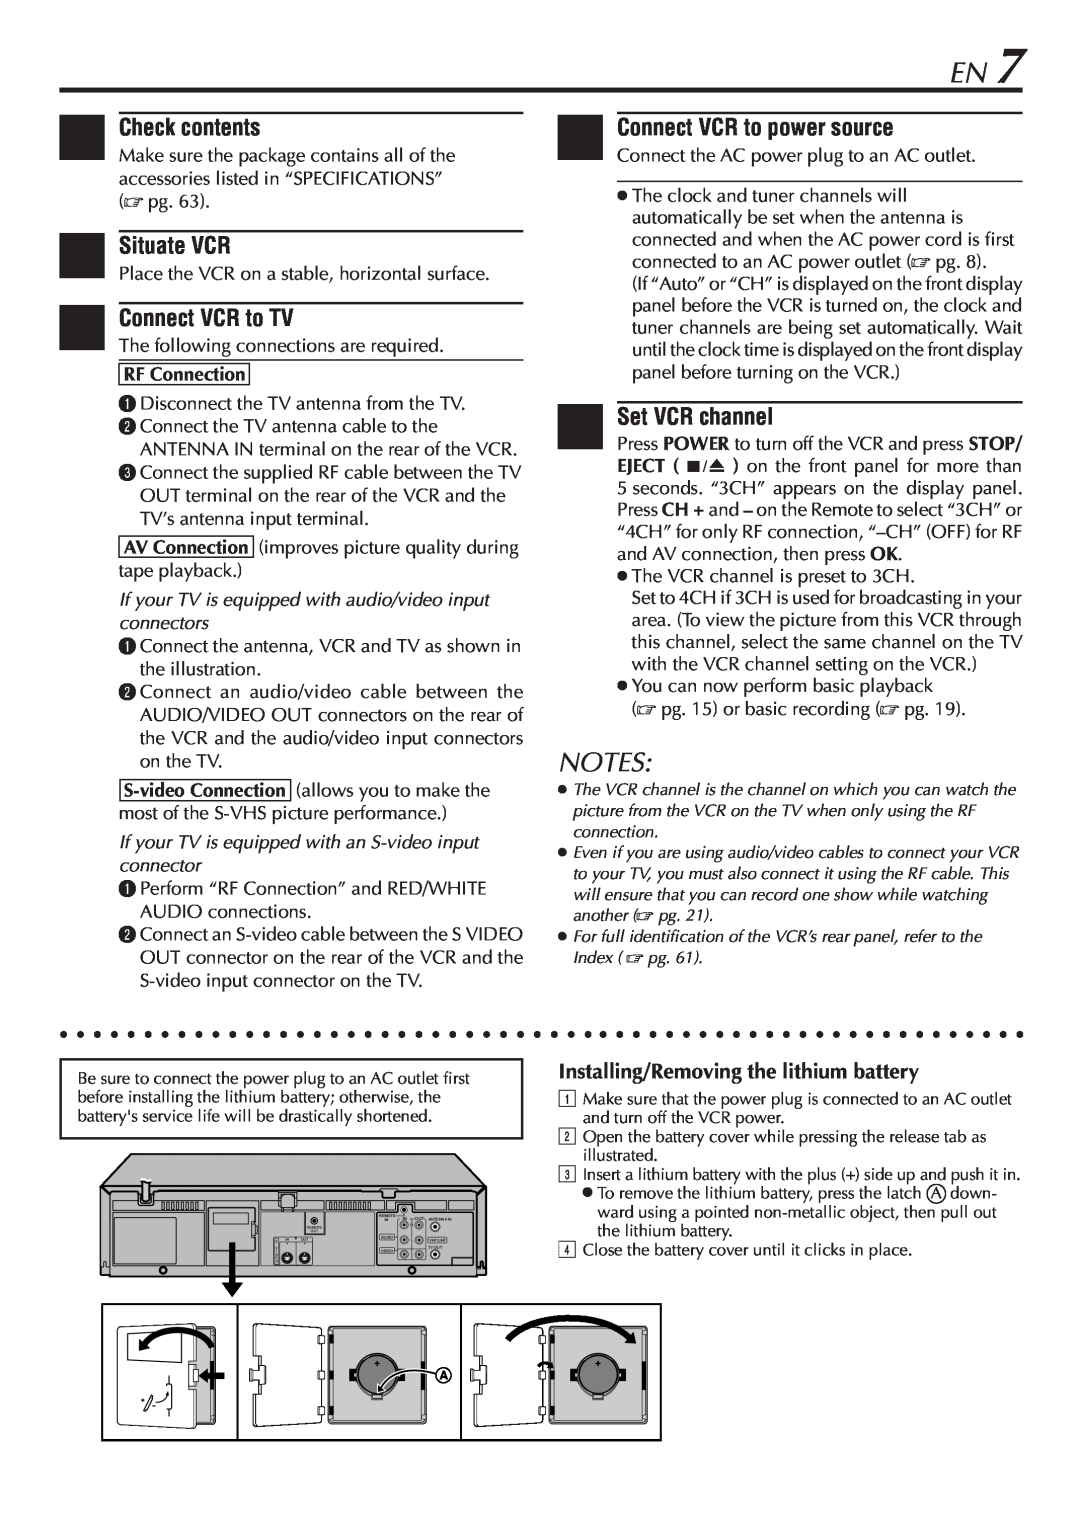 JVC SR-V10U manual Check contents, Situate VCR, Connect VCR to TV, Set VCR channel 